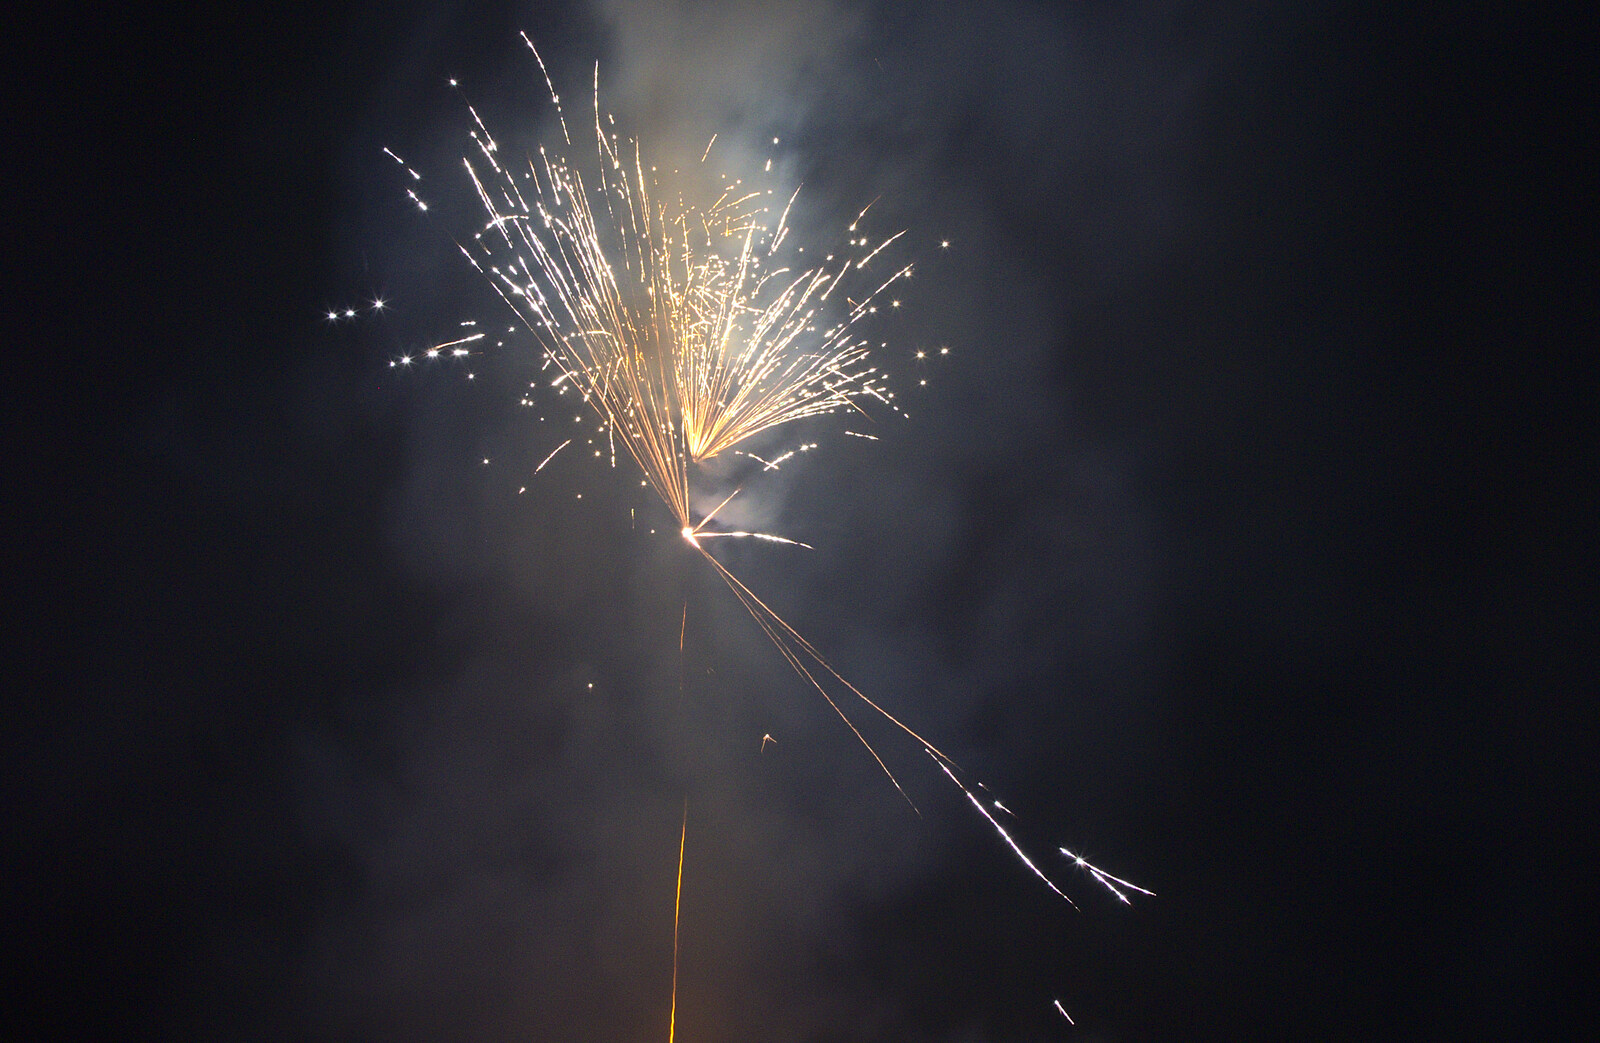 Fireworks go off from Rick Wakeman, Ian Lavender and the Christmas lights, The Oaksmere, Suffolk - 4th December 2014